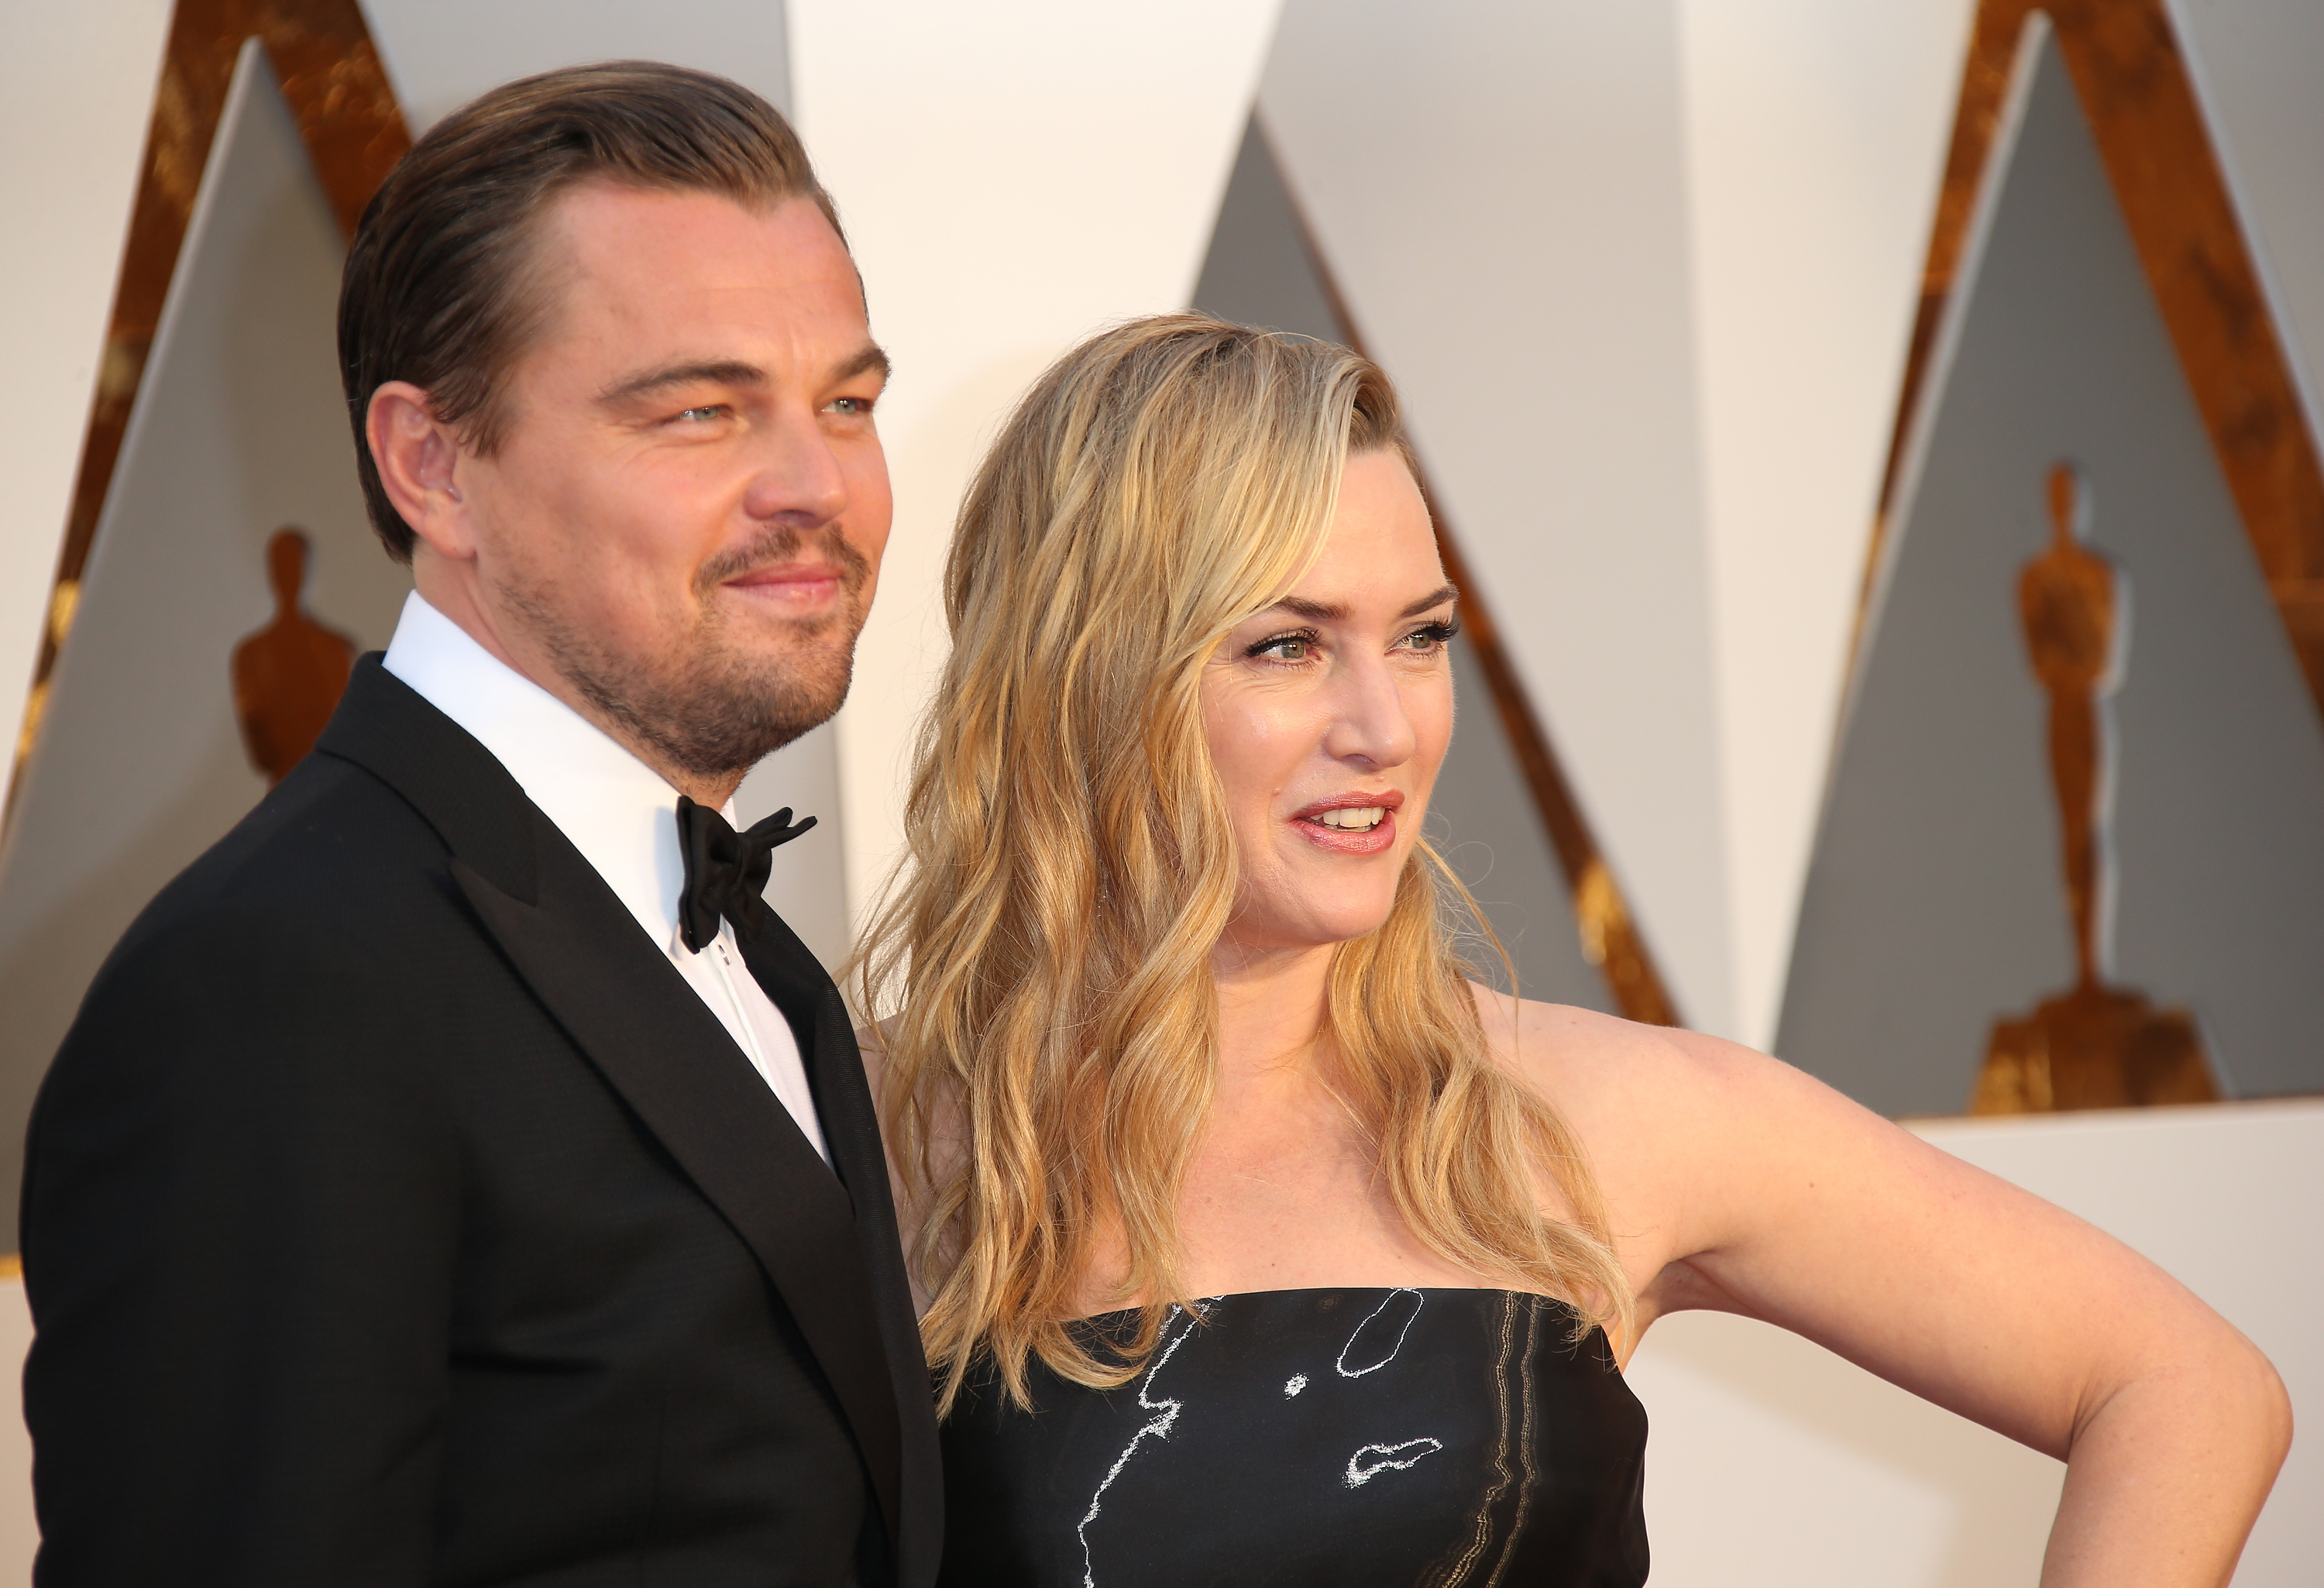 Leonardo DiCaprio and Kate Winslet attend the 88th Annual Academy Awards